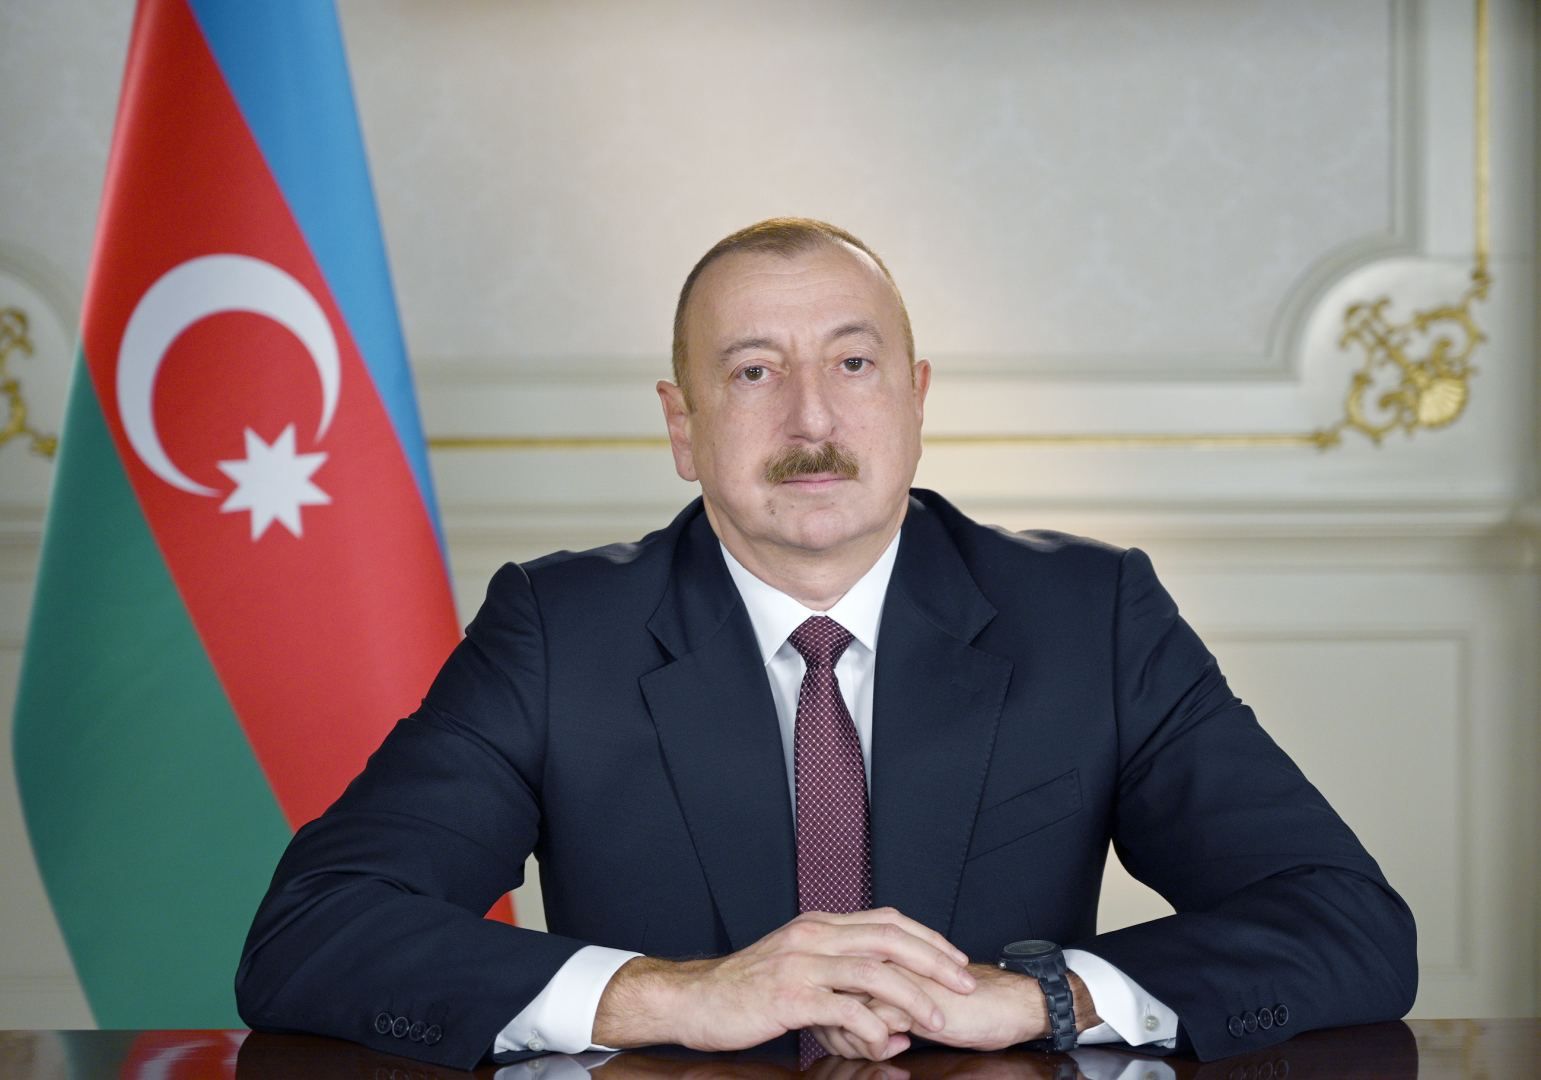 Historical, Architectural and Natural Reserve to be create in Azerbaijan, following presidential order